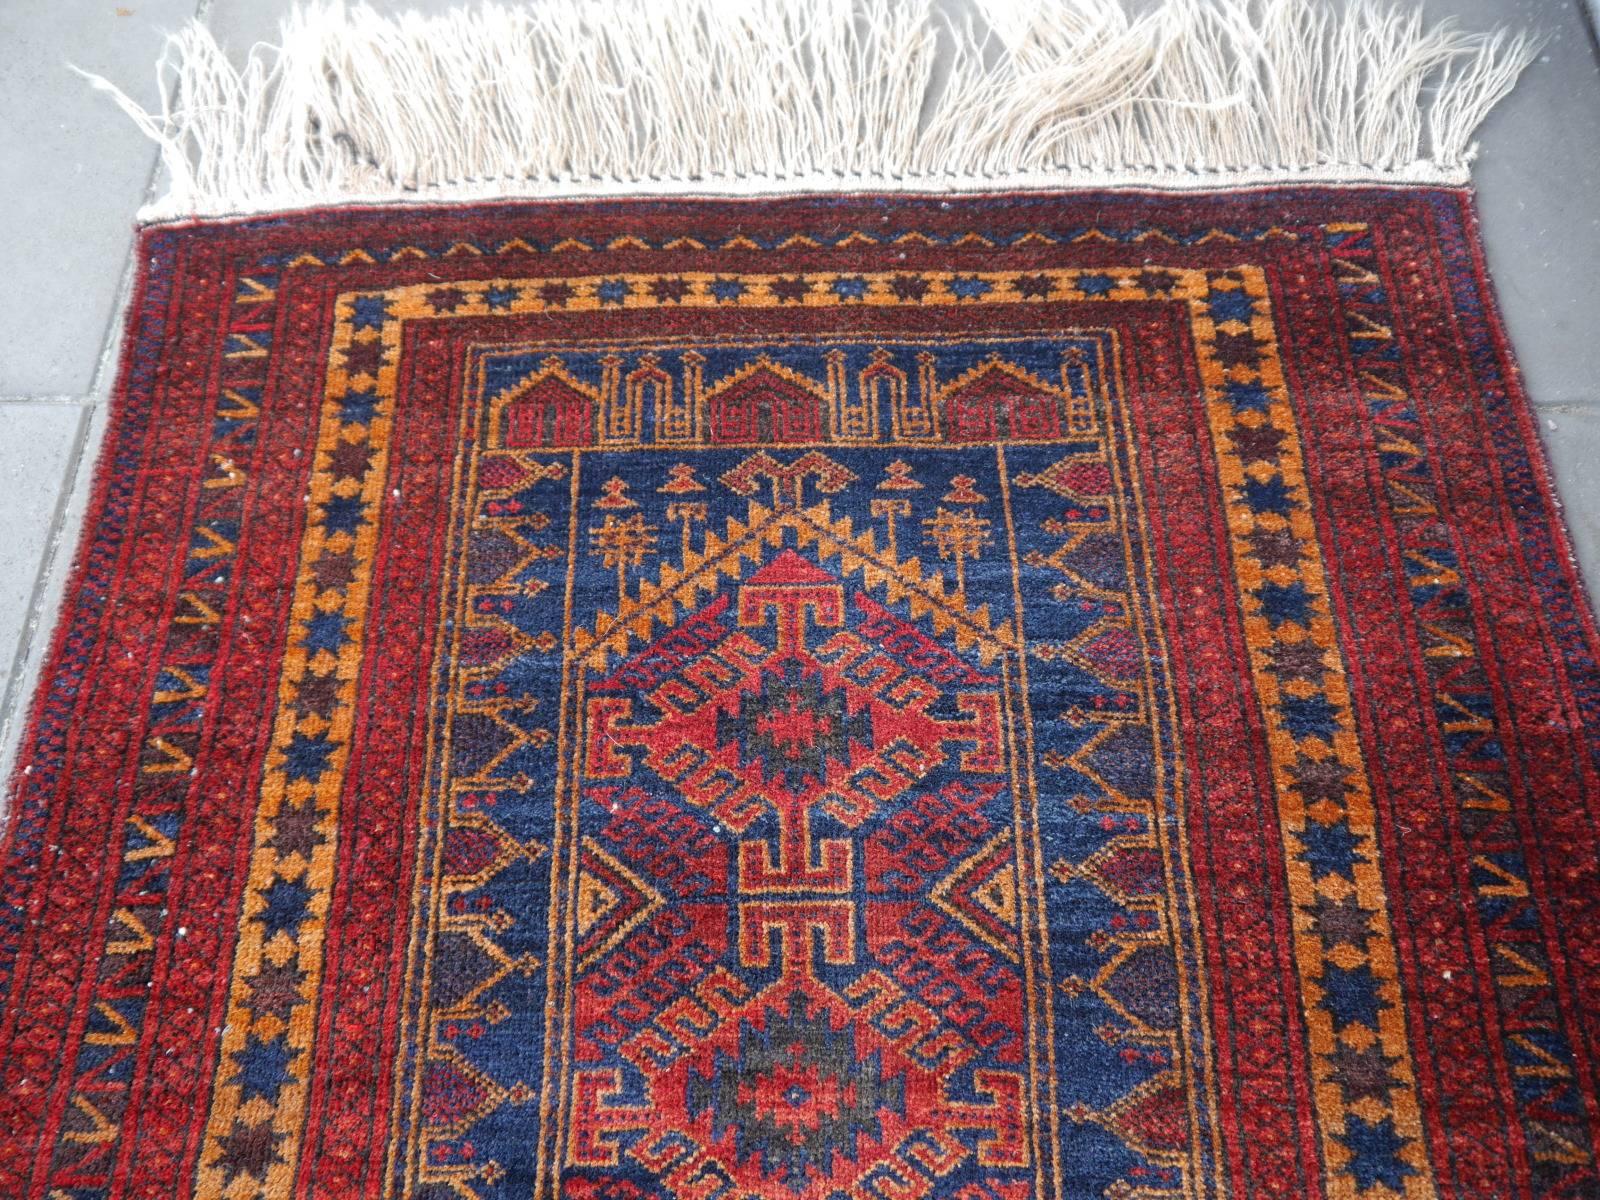 20th Century Vintage Balouch Tribal Prayer Rug Blue and Rust Color